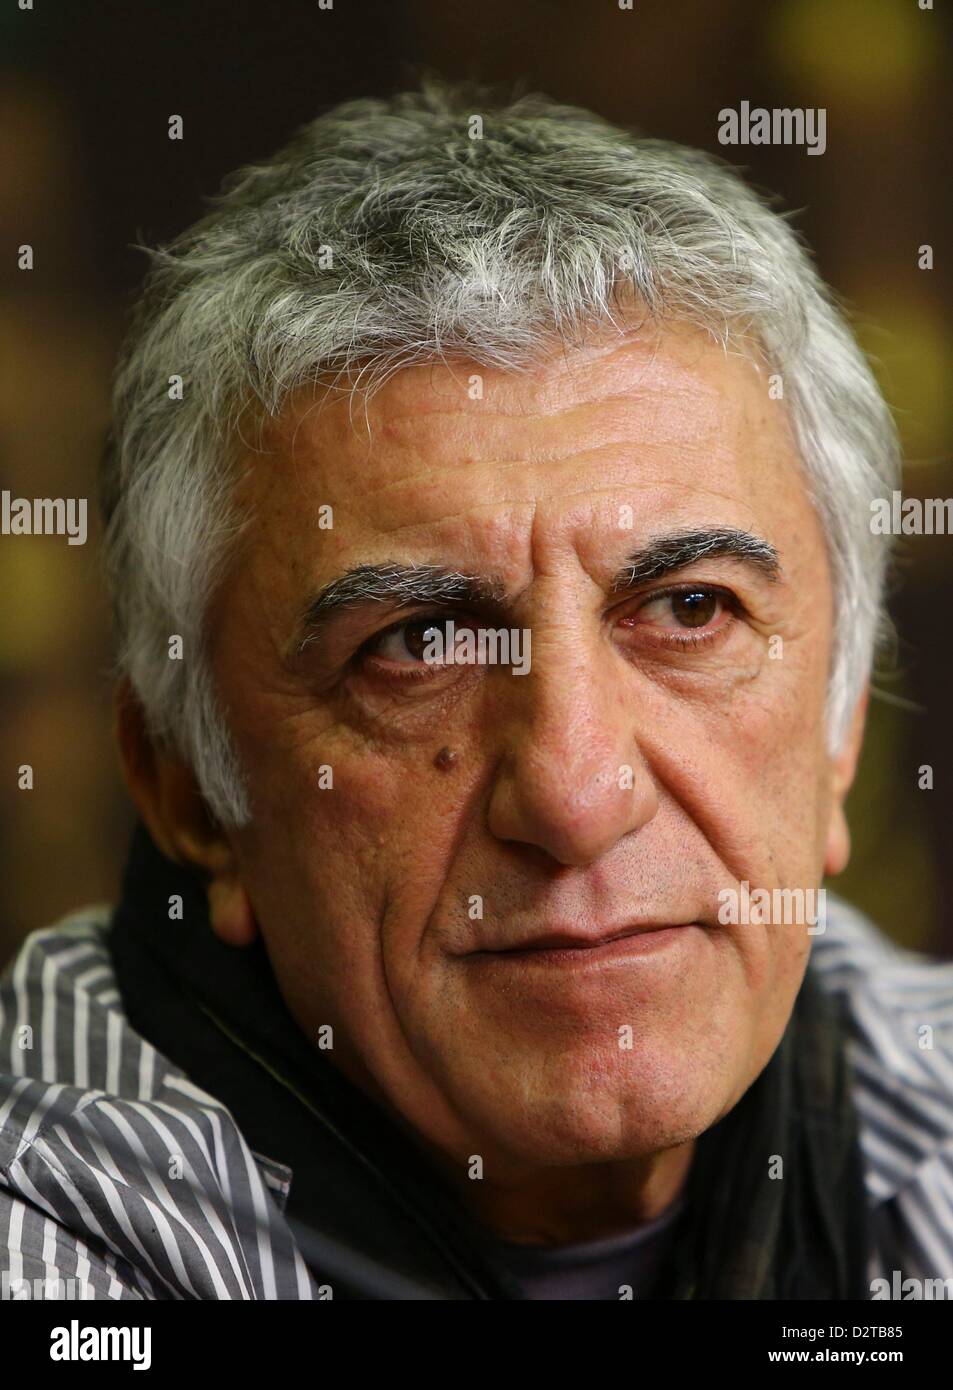 TEHRAN, IRAN: Actor Reza Kianian at Day 1 of the 31th International Fajr Film Festival on January 31, 2013 in Tehran, Iran. Organized by the Ministry of Culture and Islamic Guidance, the Film Festival is the most important film event in the country. (Photo by Gallo Images / Amin Mohammad Jamali) Stock Photo